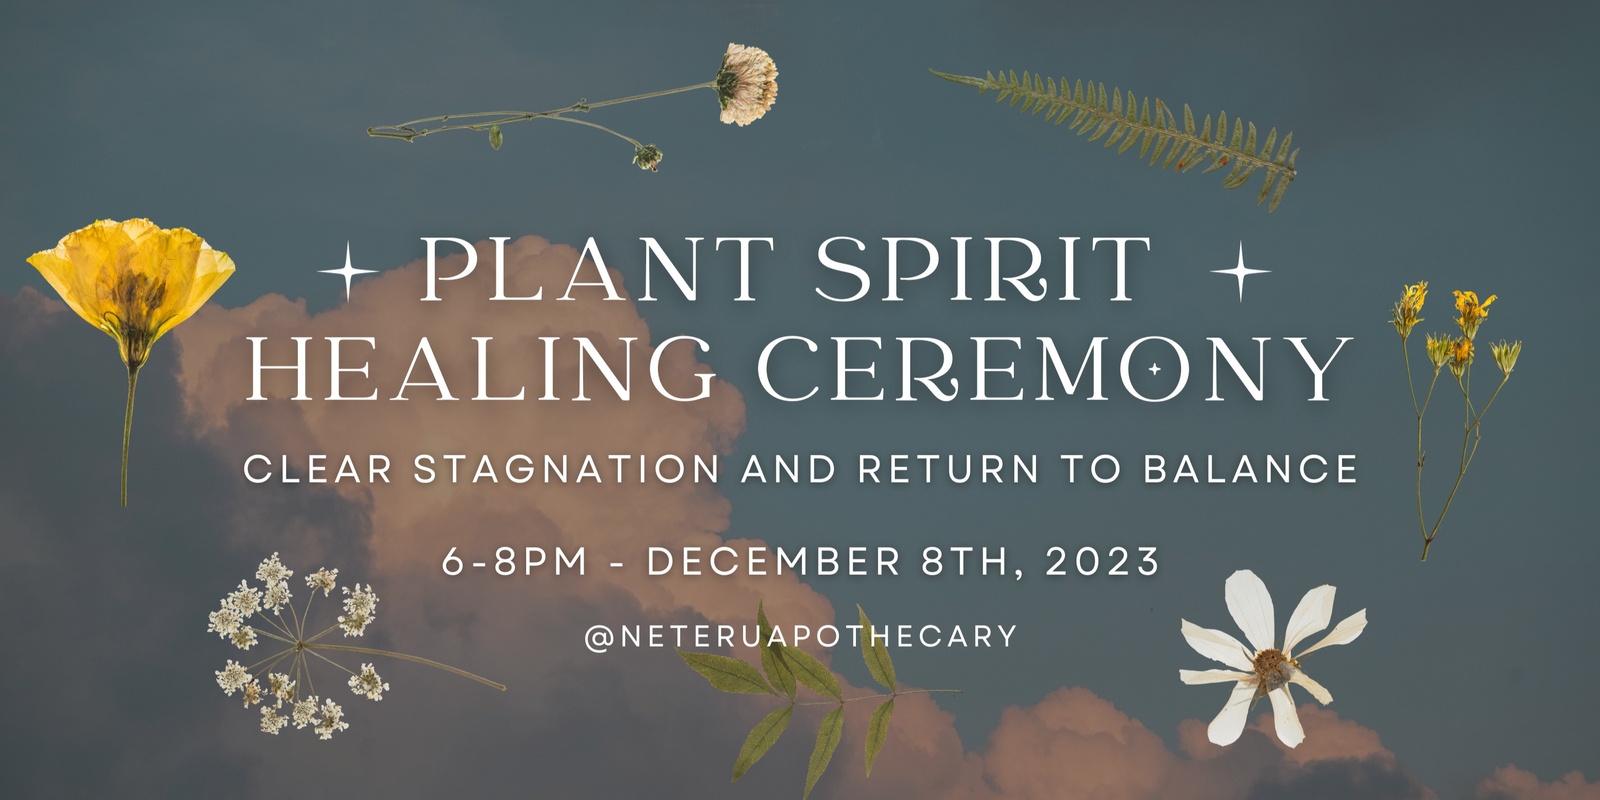 Banner image for Plant Spirit Healing Ceremony: Clear stagnation and return to balance of mind, body, and spirit.